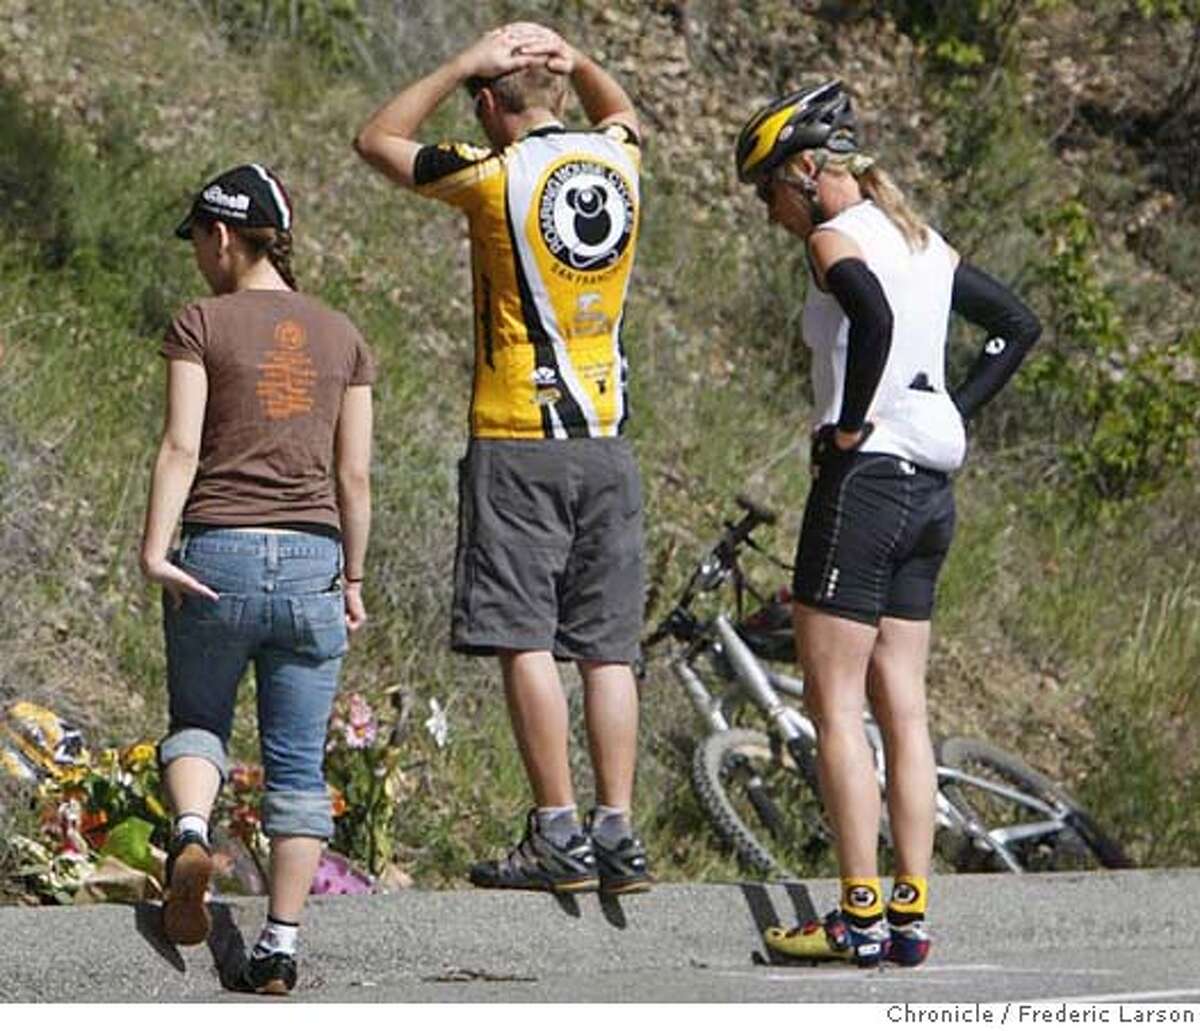 ###Live Caption:Members of the Roaring Mouse Cycling Clug of San Francisco stand by a make shift memorial has was placed at the scene Martch 10, 2008, of where Deputy James Council who was working patrol Sunday morning crossed onto the wrong side of Stevens Canyon Road at 10:25 a.m. and rammed the three southbound bicyclists head-on killing two and injuring the other. 3/10/08 Photo by Frederic Larson / San Francisco Chronicle###Caption History:Members of the Roaring Mouse Cycling Clug of San Francisco stand by a make shift memorial has was placed at the scene Martch 10, 2008, of where Deputy James Council who was working patrol Sunday morning crossed onto the wrong side of Stevens Canyon Road at 10:25 a.m. and rammed the three southbound bicyclists head-on killing two and injuring the other. 3/10/08 Photo by Frederic Larson / San Francisco Chronicle###Notes:###Special Instructions:MANDATORY CREDIT FOR PHOTOG AND SAN FRANCISCO CHRONICLE/NO SALES-MAGS OUT